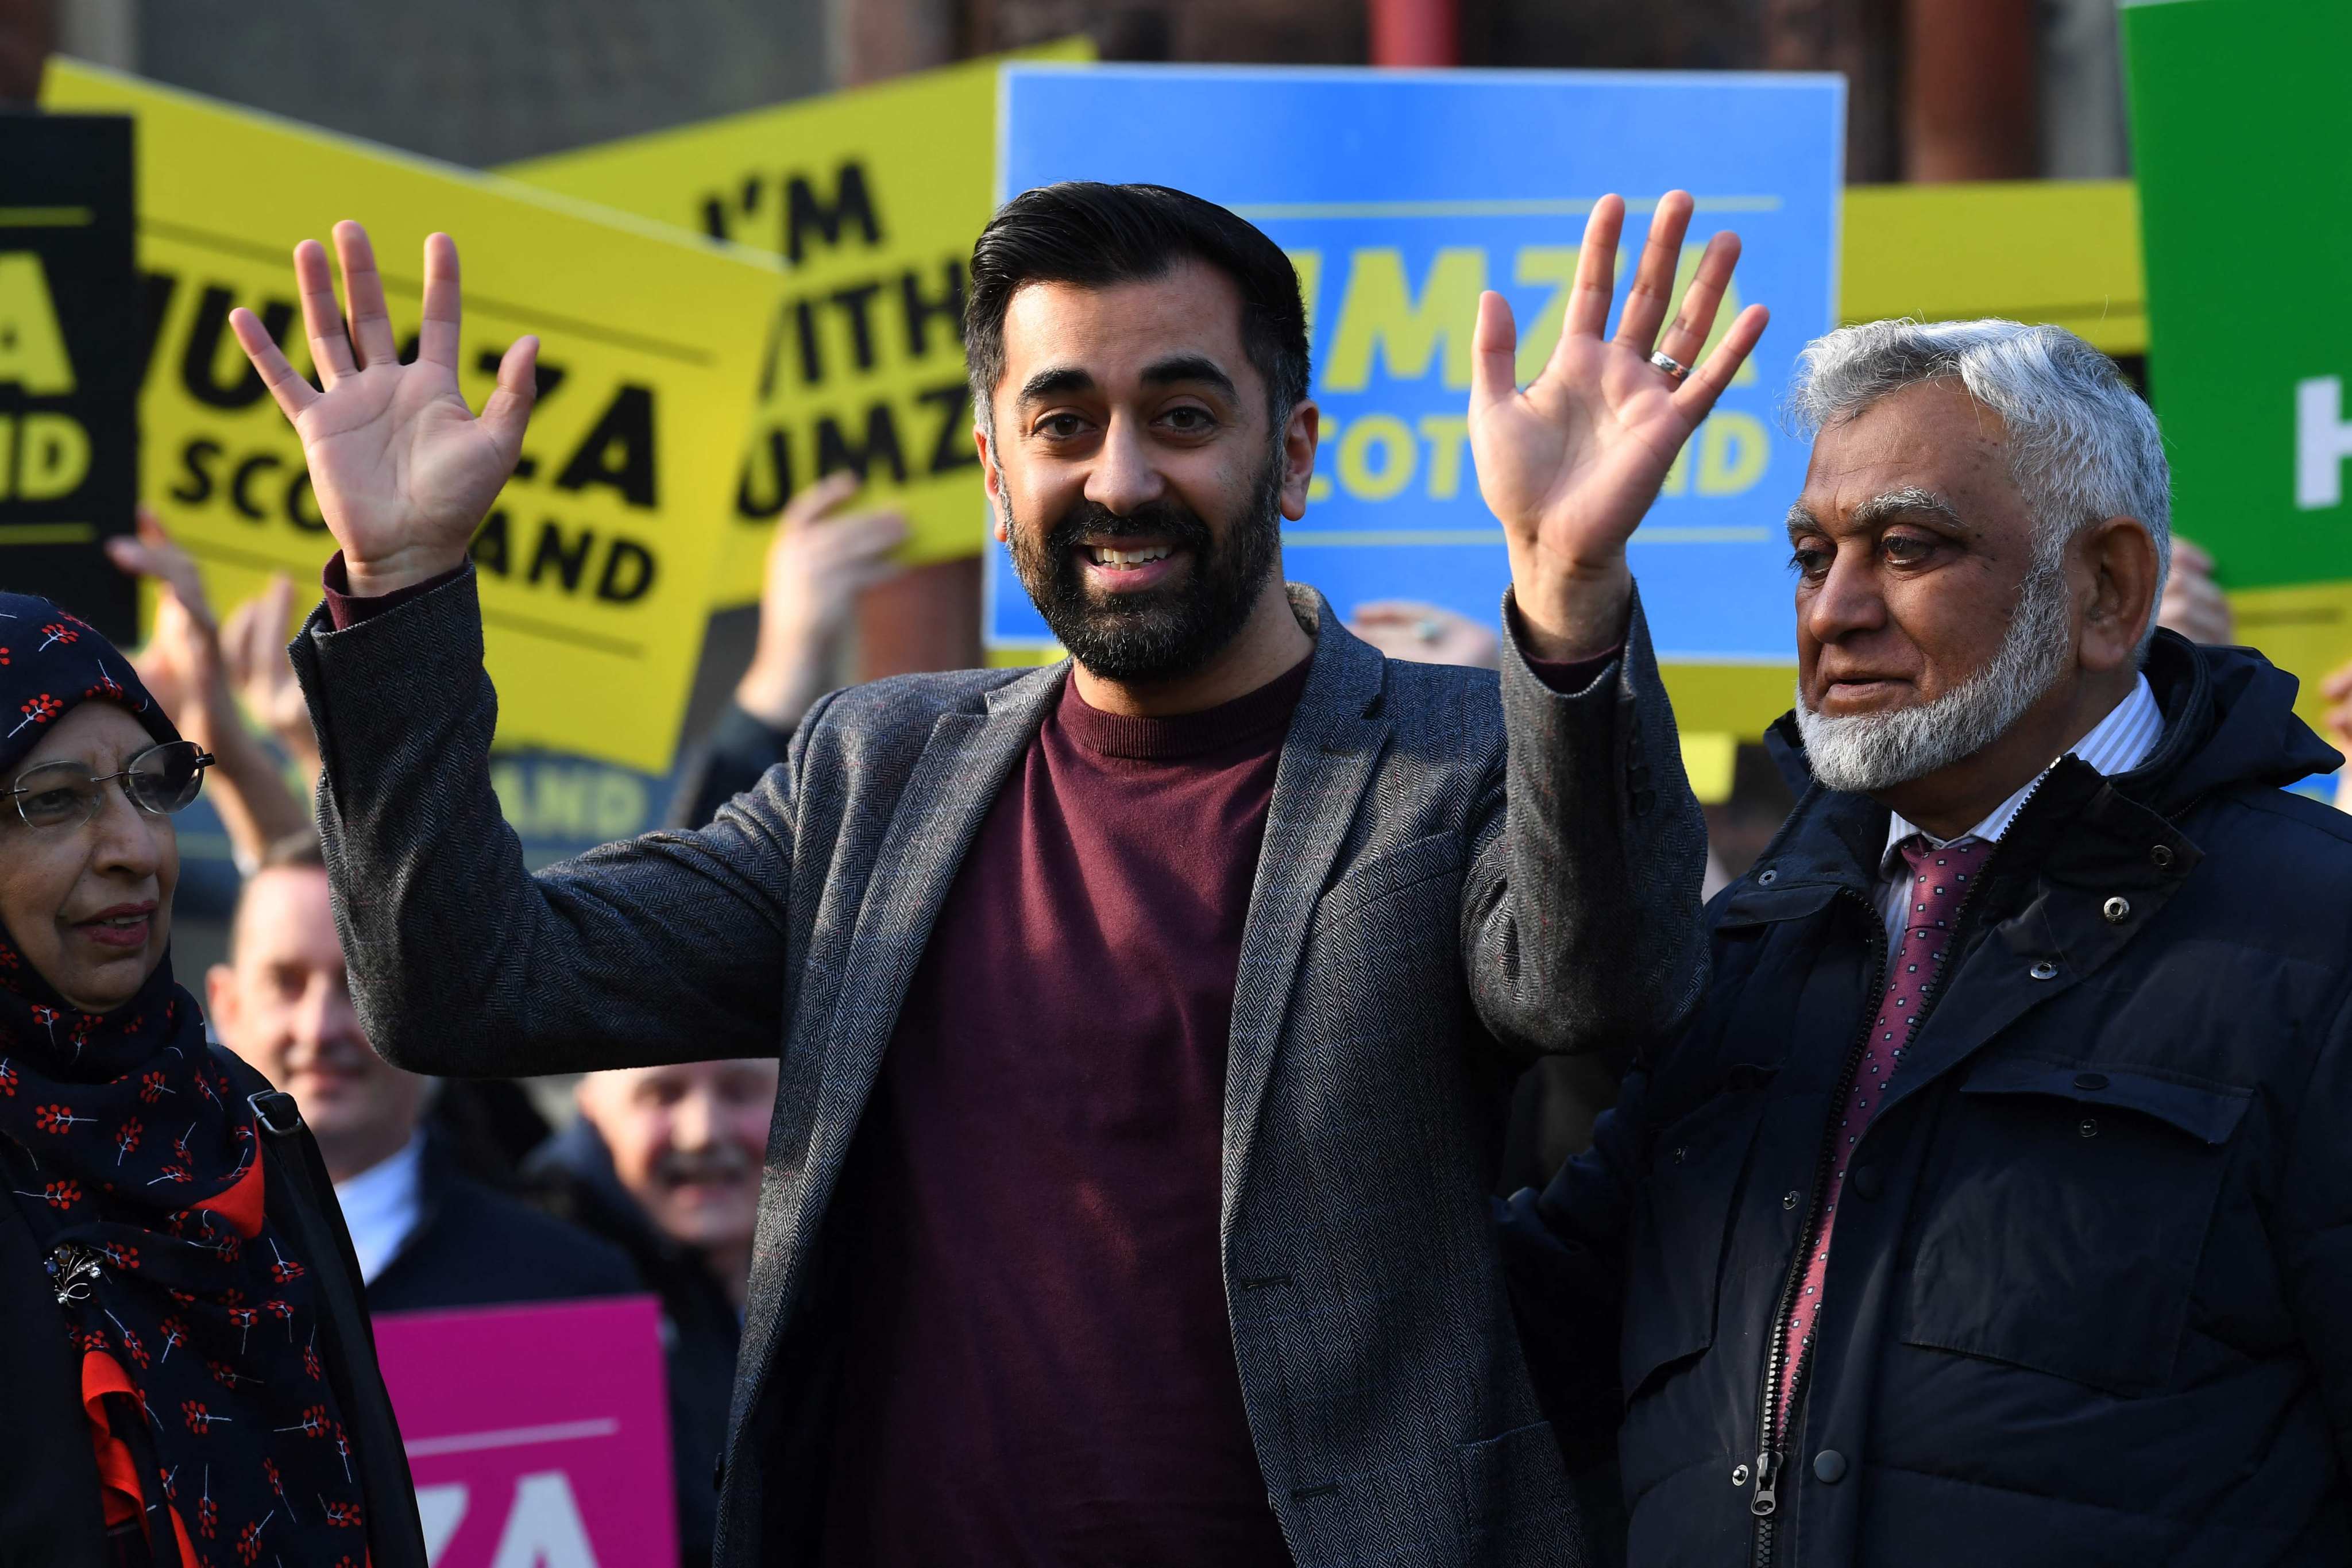 Humza Yousaf is eyeing the Scottish National Party’s top job. Photo: AFP